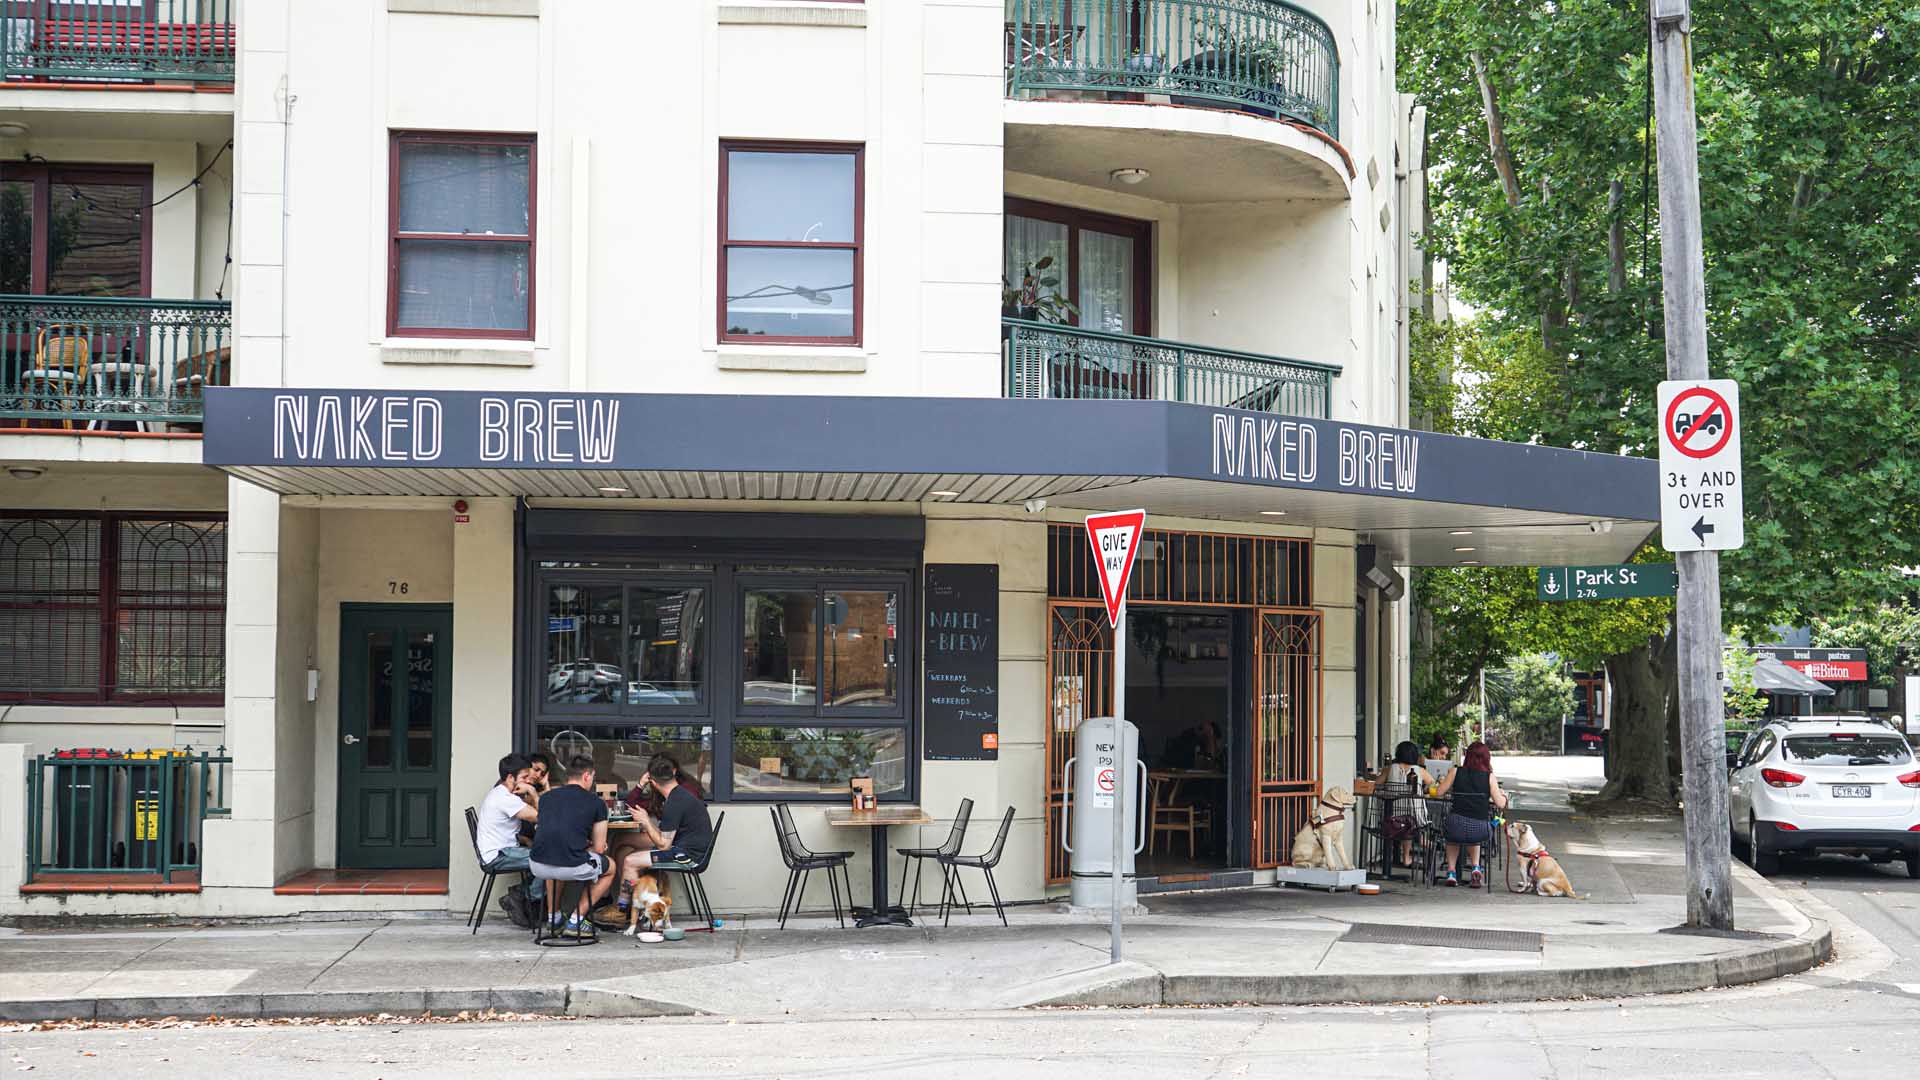 Our Sydney: Here Are Our Readers' Favourite Spots to Visit in Newtown and Erskineville